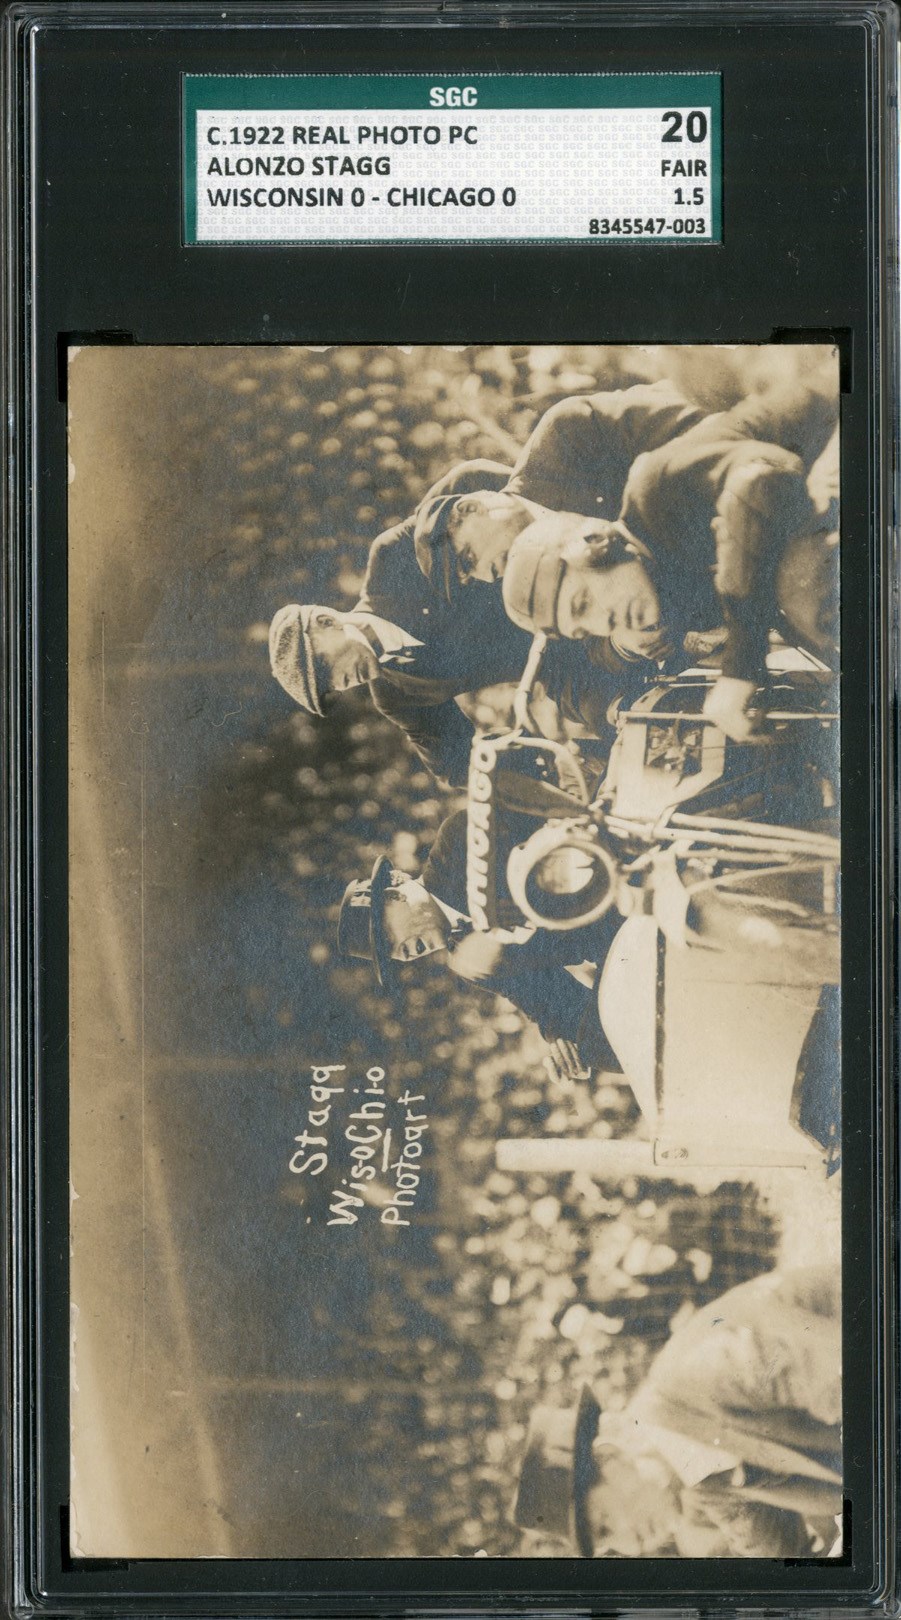 - 1922 Amos Alonzo Staggs "Coaching By Motorcycle" Real Photo Postcard (SGC)